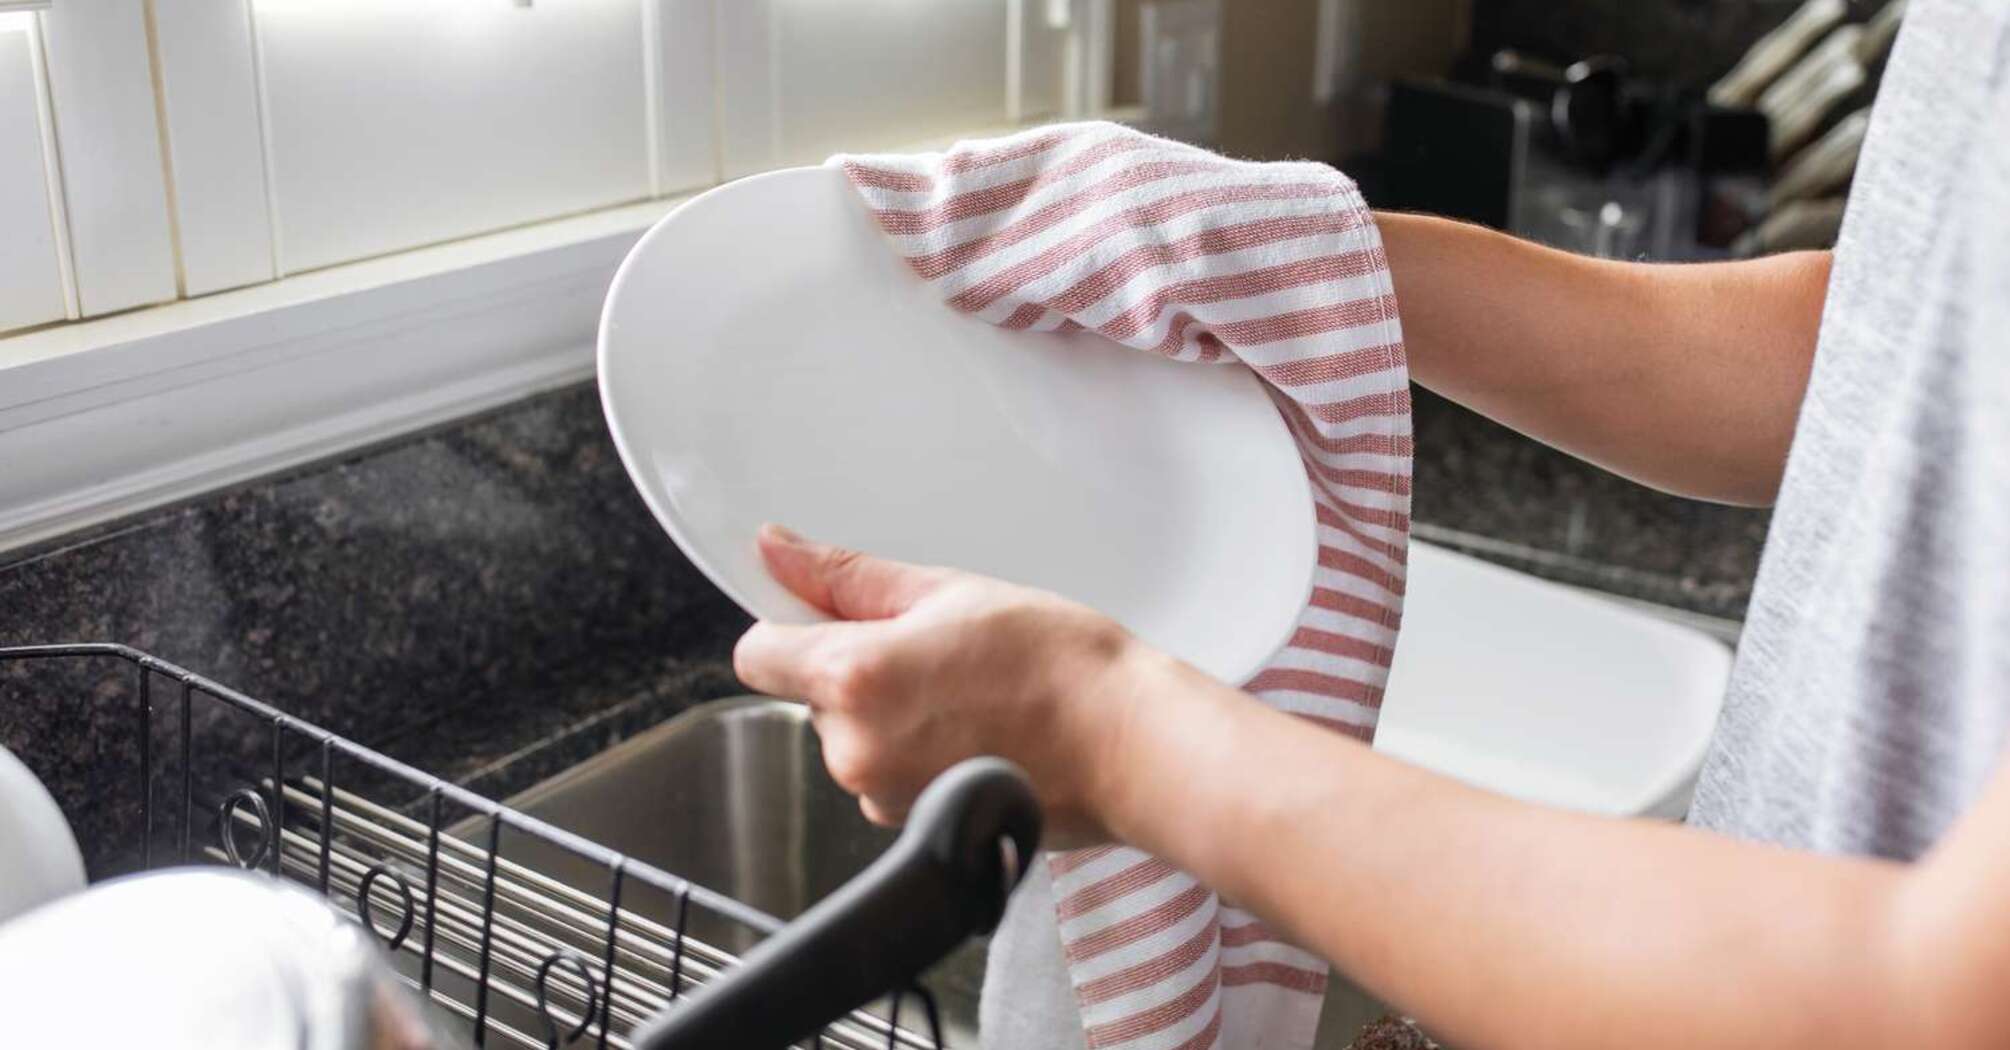 How to handle dishes in your home